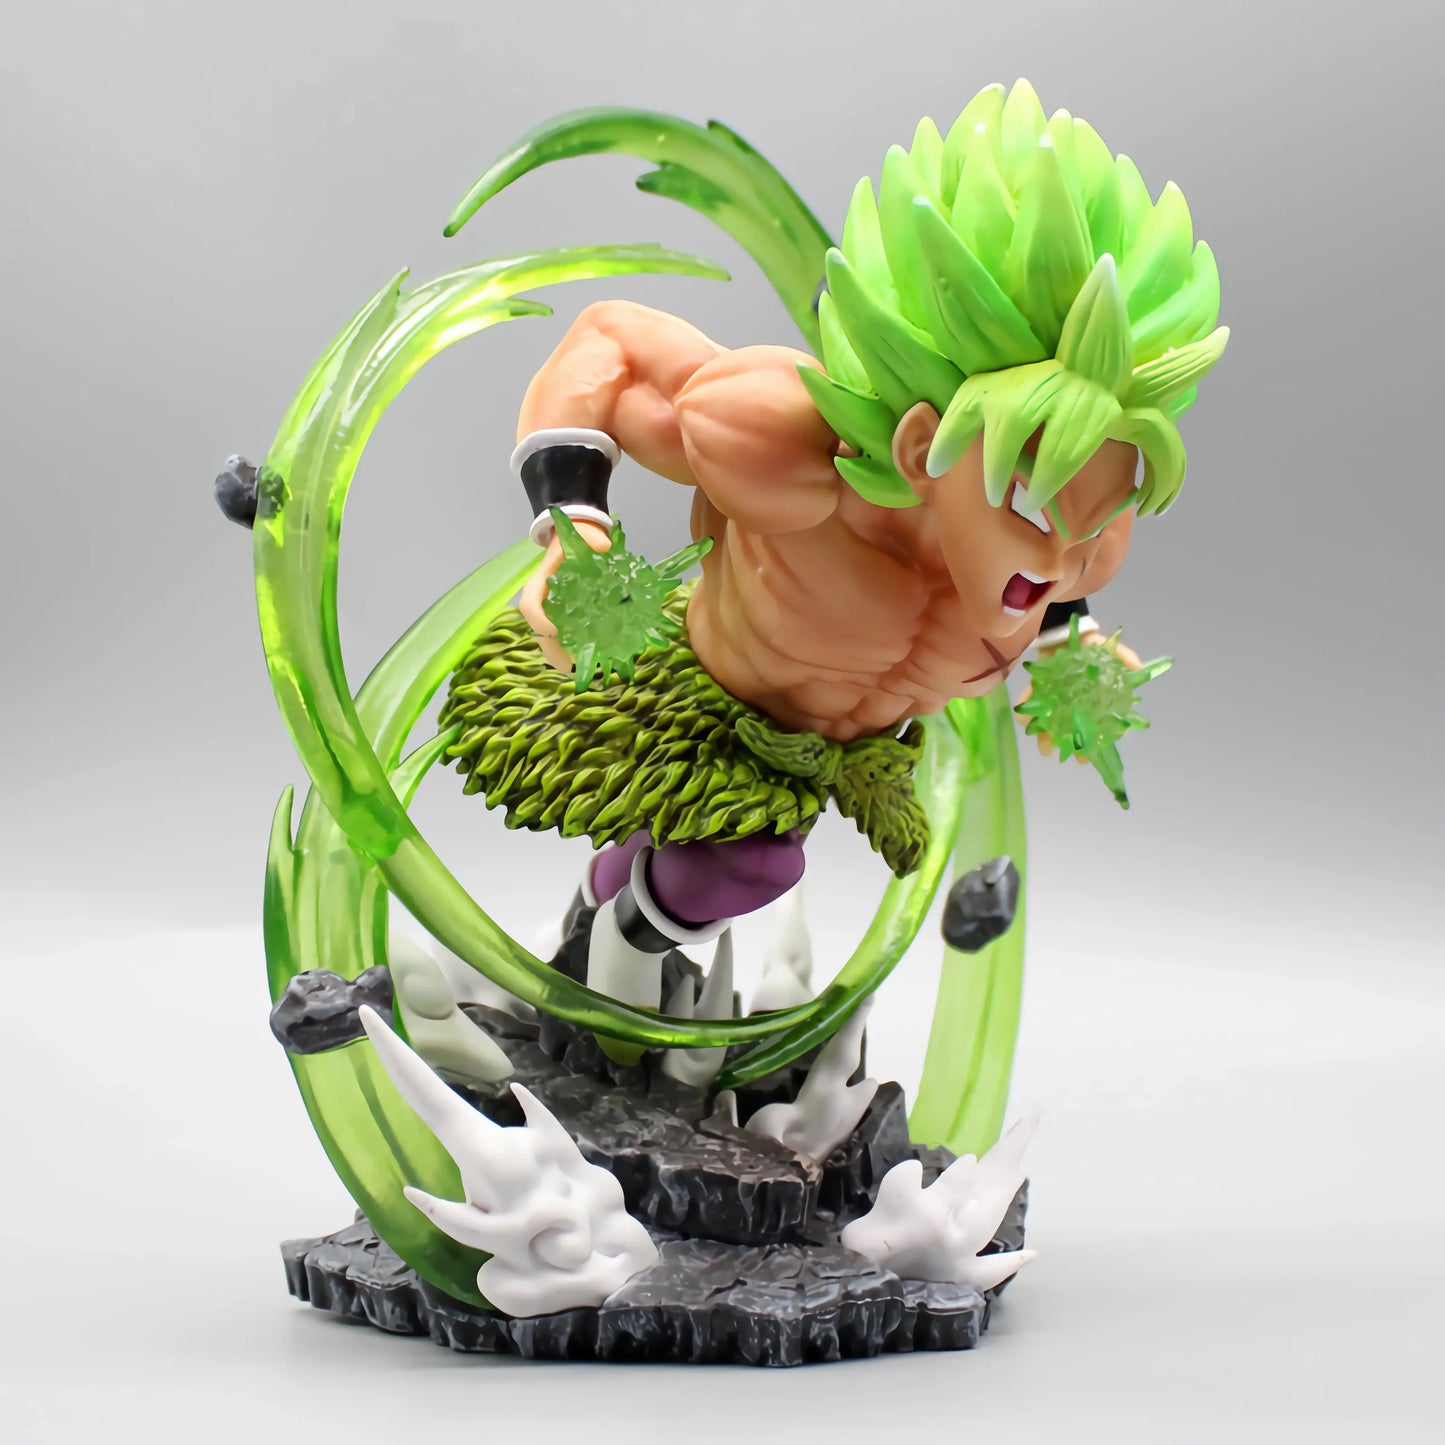 Full display of the Dragon Ball collectible depicting Broly in a battle pose with green energy effects, on a detailed rock-like base.